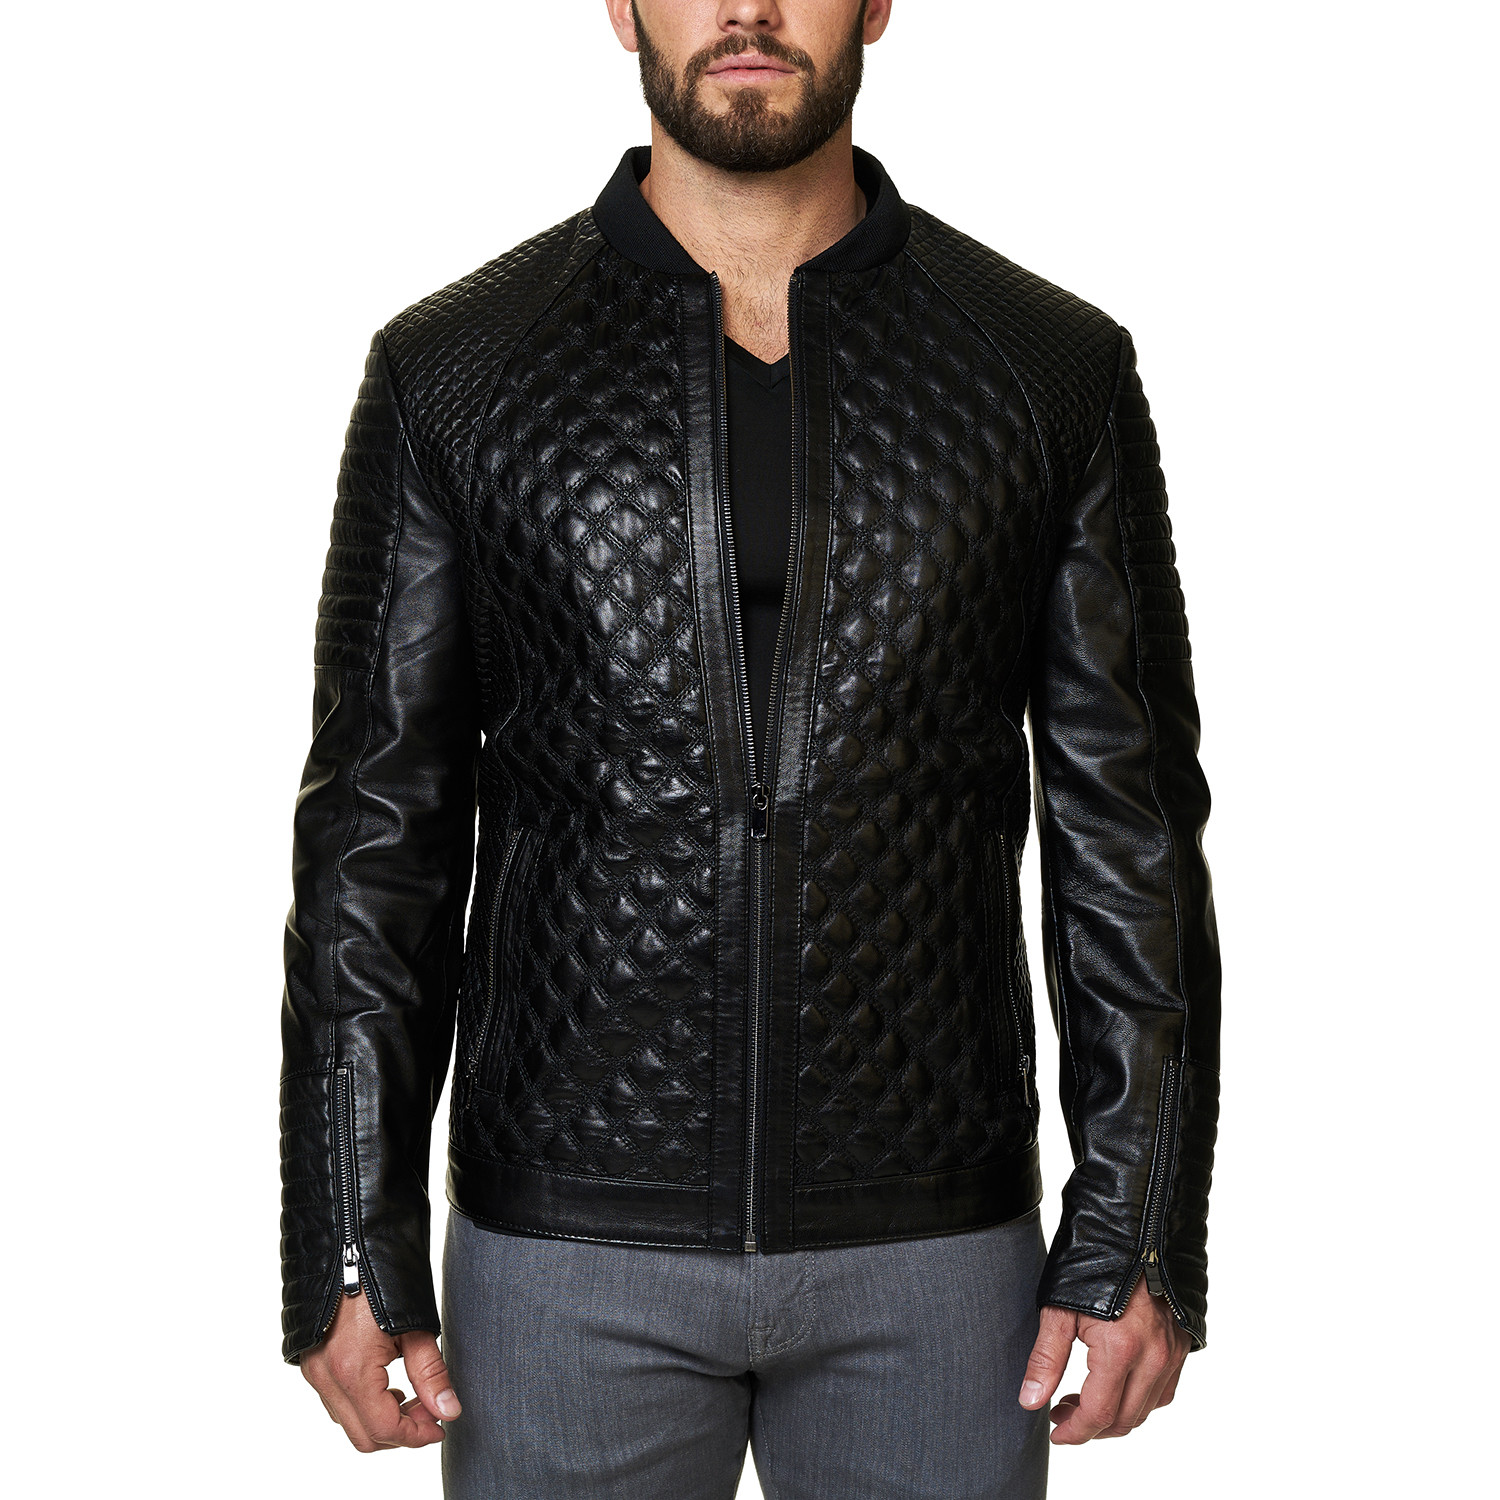 Croco Bomber Jacket // Black (S) - Maceoo - Touch of Modern